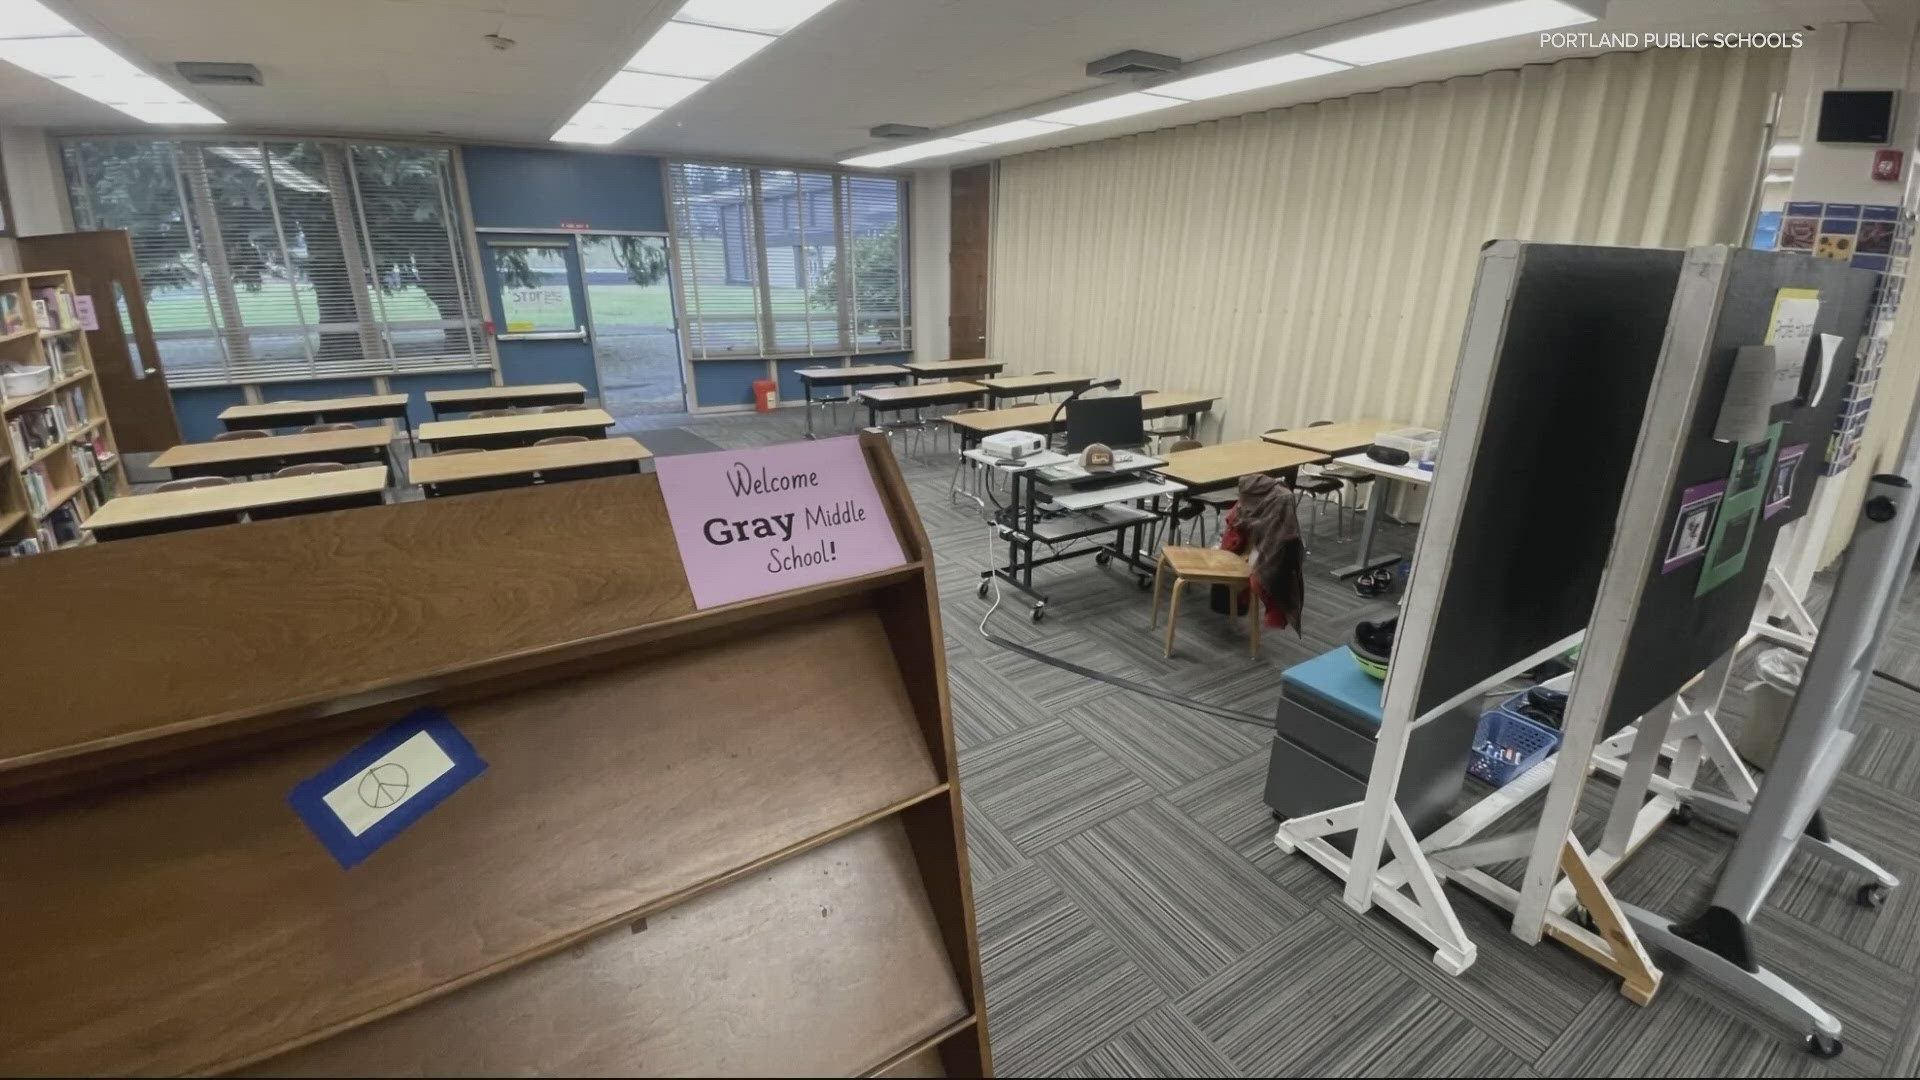 PPS sent a letter to families, saying there will possibly be more weeks of delays, leaving Robert Gray Middle and Markham Elementary with portable classrooms.